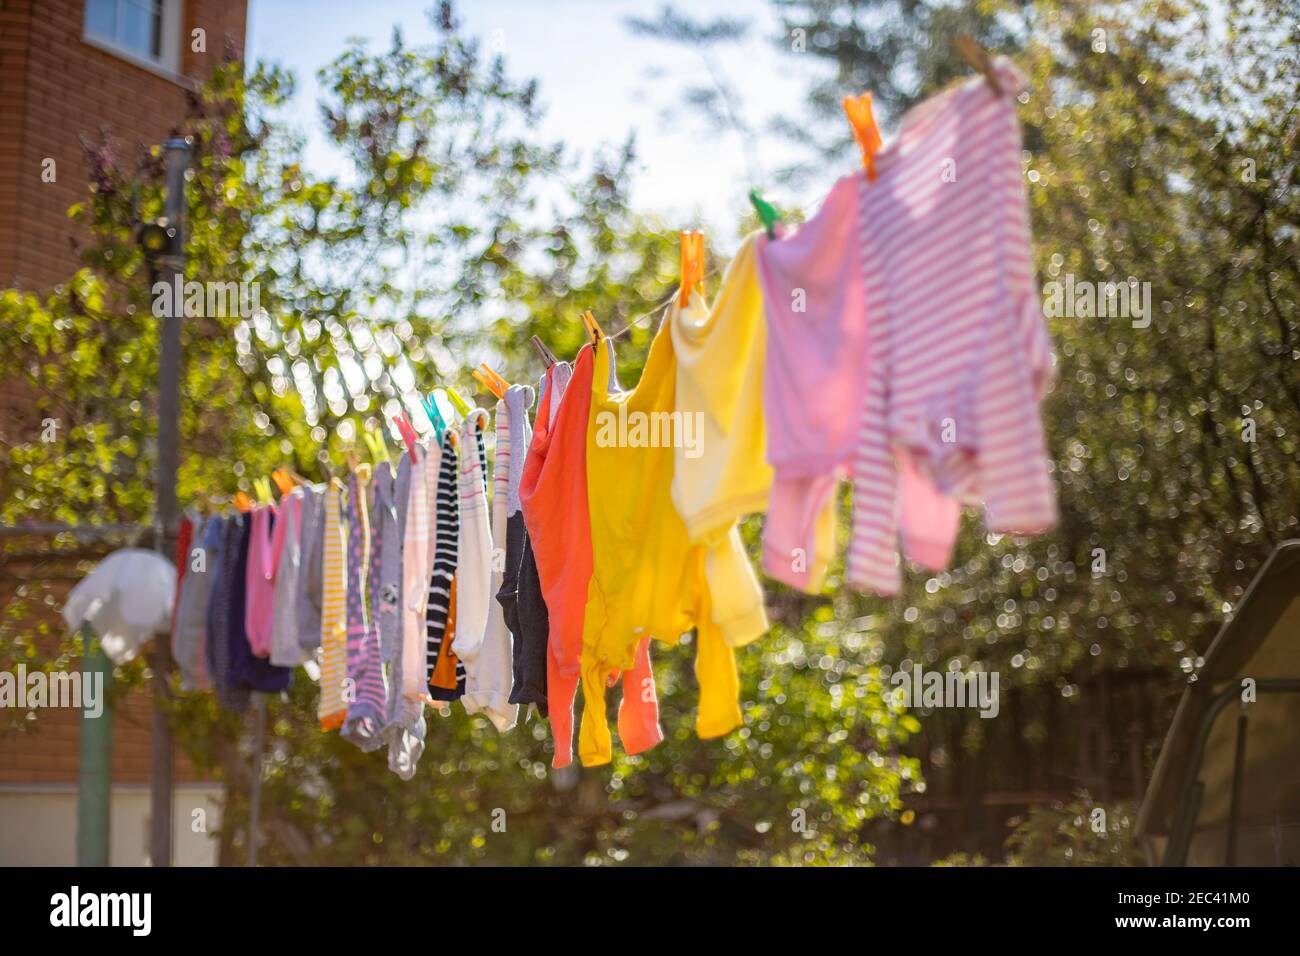 Baby cute clothes hanging on the clothesline outdoor. Child